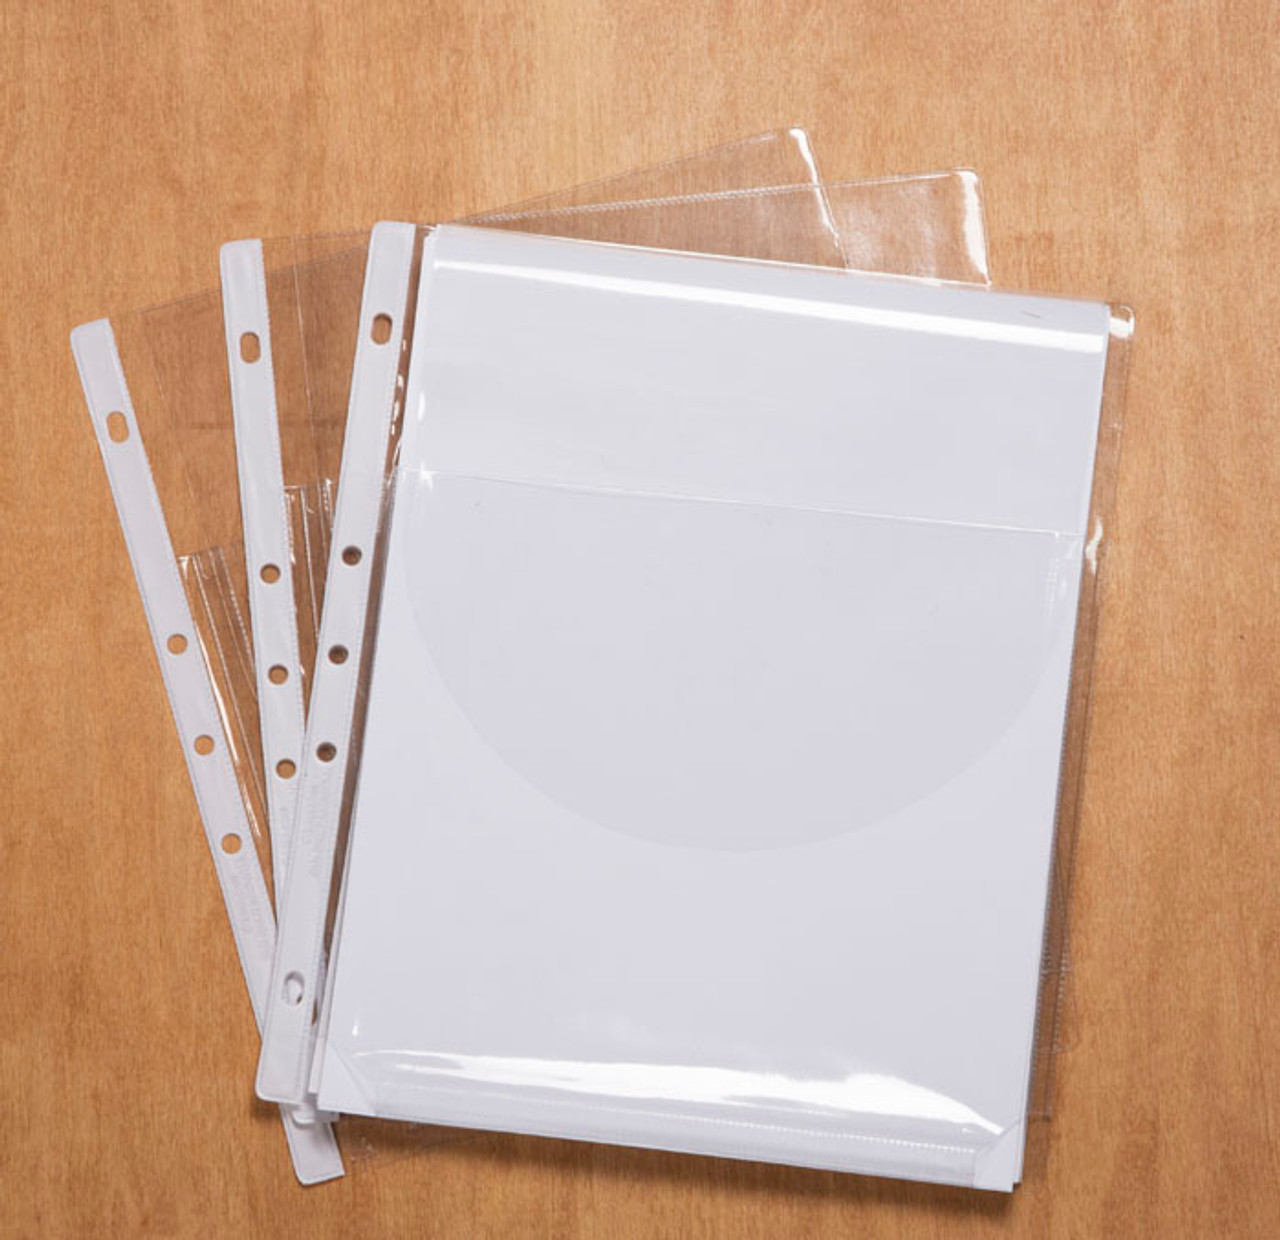 https://cdn11.bigcommerce.com/s-qfy5foqczc/images/stencil/1280x1280/products/1653/2013/expandable-heavy-duty-sheet-protectors-with-flap-closure-68__59434.1601907747.jpg?c=2?imbypass=on